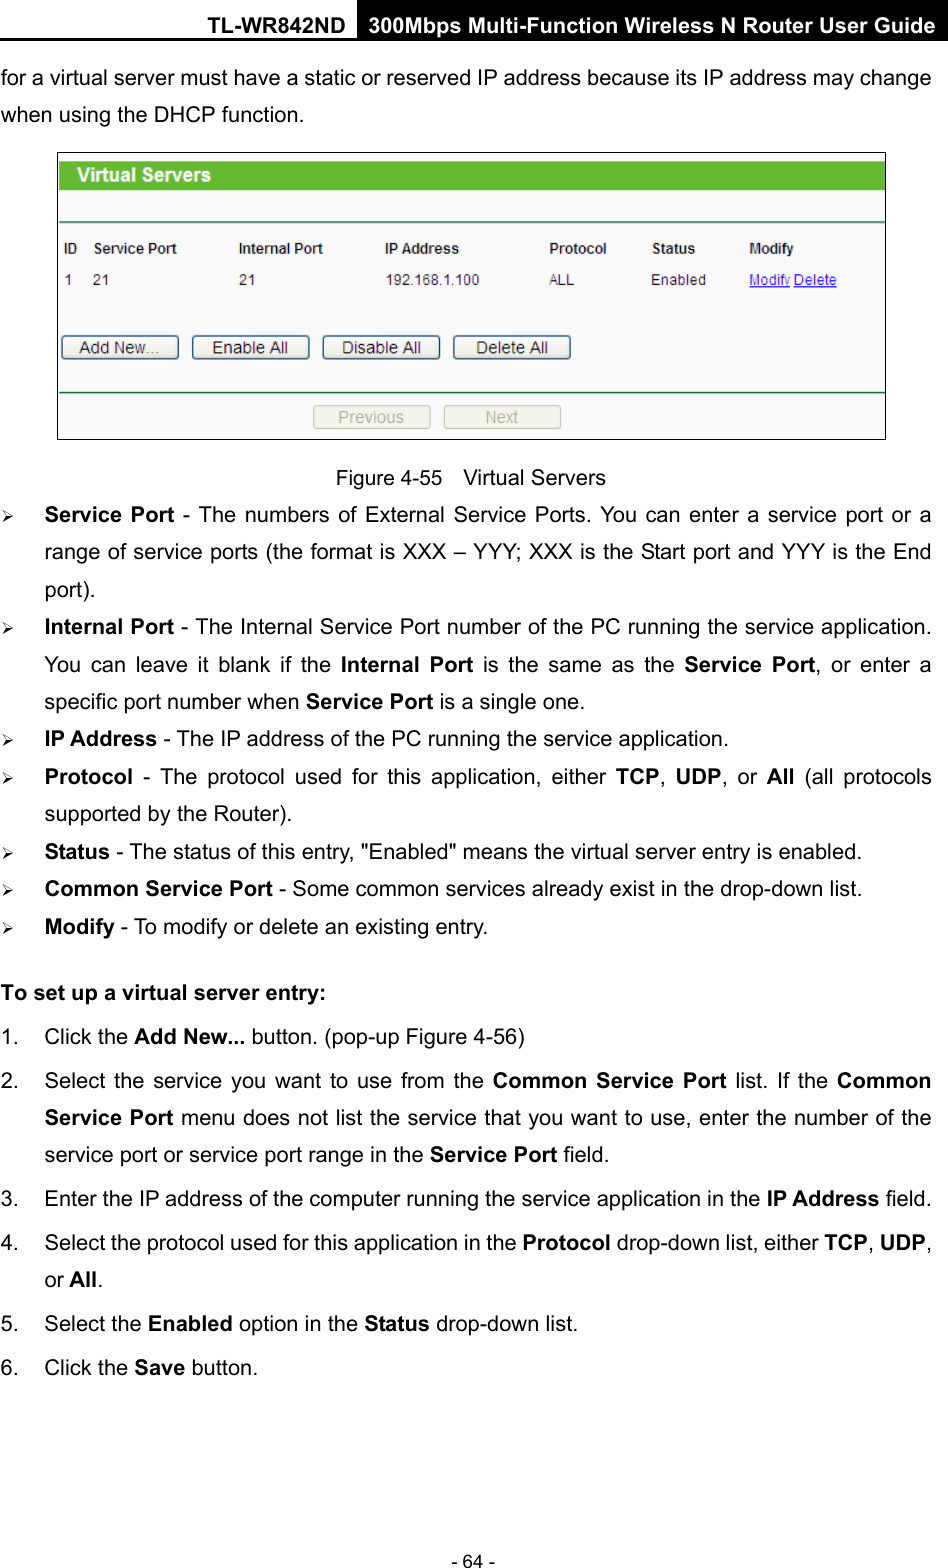 TL-WR842ND 300Mbps Multi-Function Wireless N Router User Guide  - 64 - for a virtual server must have a static or reserved IP address because its IP address may change when using the DHCP function.    Figure 4-55  Virtual Servers  Service Port  - The numbers of External Service Ports. You can enter a service port or a range of service ports (the format is XXX – YYY; XXX is the Start port and YYY is the End port).    Internal Port - The Internal Service Port number of the PC running the service application. You can leave it blank if the Internal Port is the same as the Service Port, or enter a specific port number when Service Port is a single one.    IP Address - The IP address of the PC running the service application.    Protocol  -  The protocol used for this application, either TCP,  UDP, or All  (all protocols supported by the Router).    Status - The status of this entry, &quot;Enabled&quot; means the virtual server entry is enabled.    Common Service Port - Some common services already exist in the drop-down list.    Modify - To modify or delete an existing entry.   To set up a virtual server entry:   1. Click the Add New... button. (pop-up Figure 4-56) 2. Select the service you want to use from the Common Service Port list. If the Common Service Port menu does not list the service that you want to use, enter the number of the service port or service port range in the Service Port field.   3. Enter the IP address of the computer running the service application in the IP Address field.   4. Select the protocol used for this application in the Protocol drop-down list, either TCP, UDP, or All.   5. Select the Enabled option in the Status drop-down list.   6. Click the Save button.   